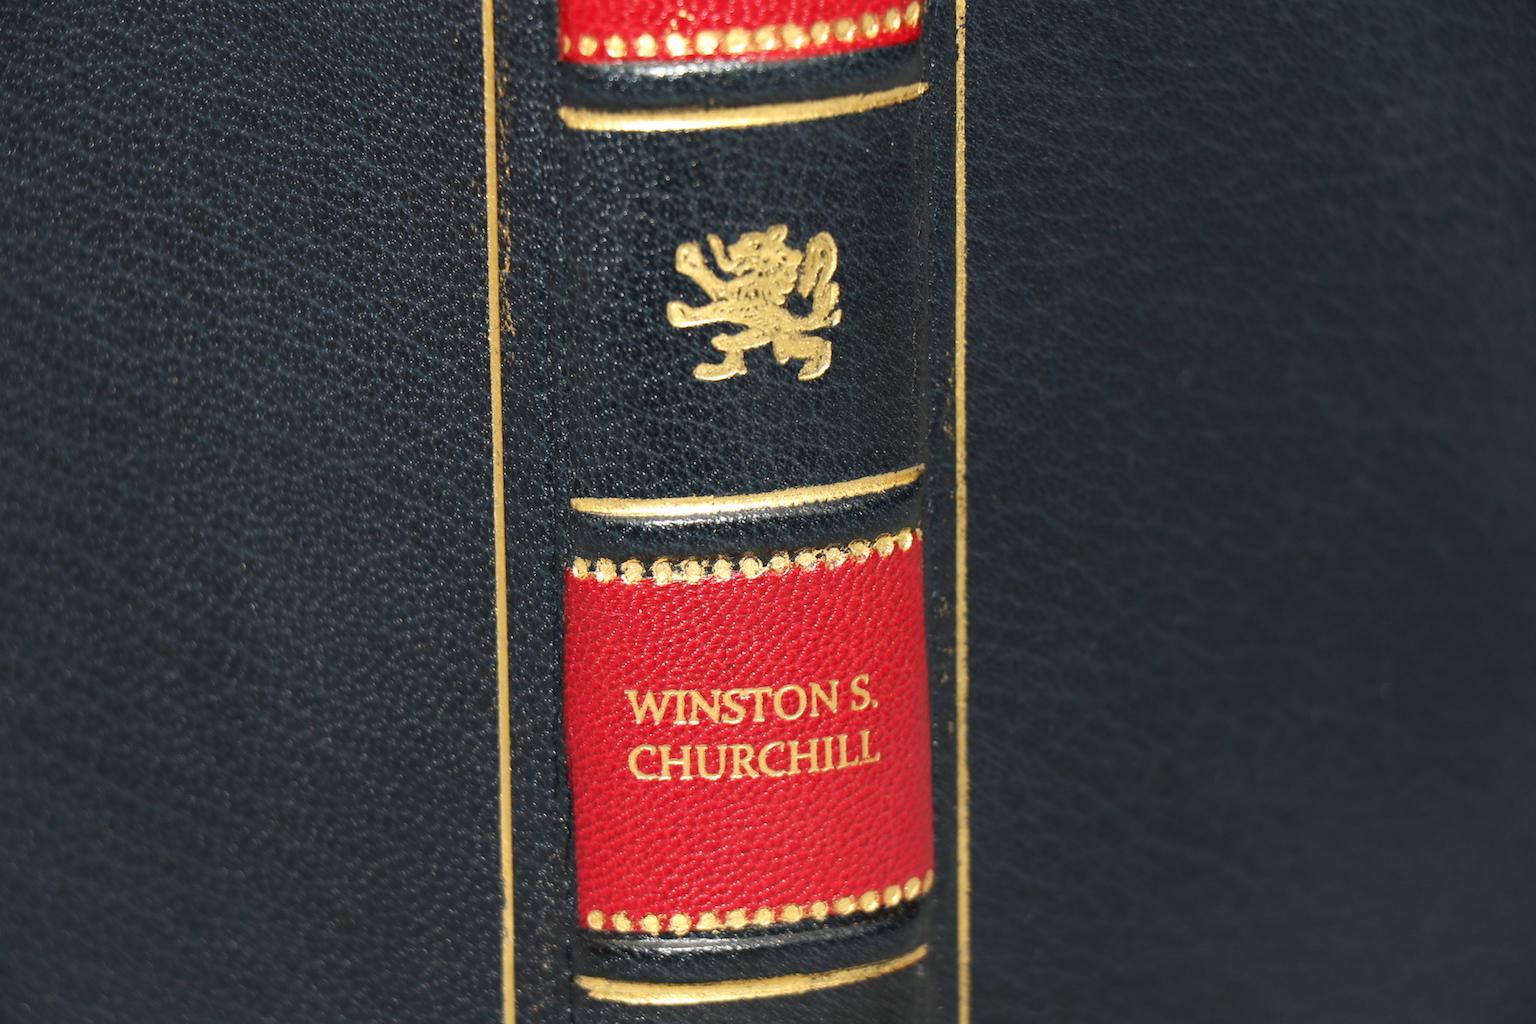 Leatherbound. 12 volumes. Bound in full blue morocco leather with all edges gilt, raised bands, and gilt tooling on spines. Very good. Published in London by Cassell & Co. between 1941 and 1961.

Sir Winston Spencer-Churchill (1874–1965) was a